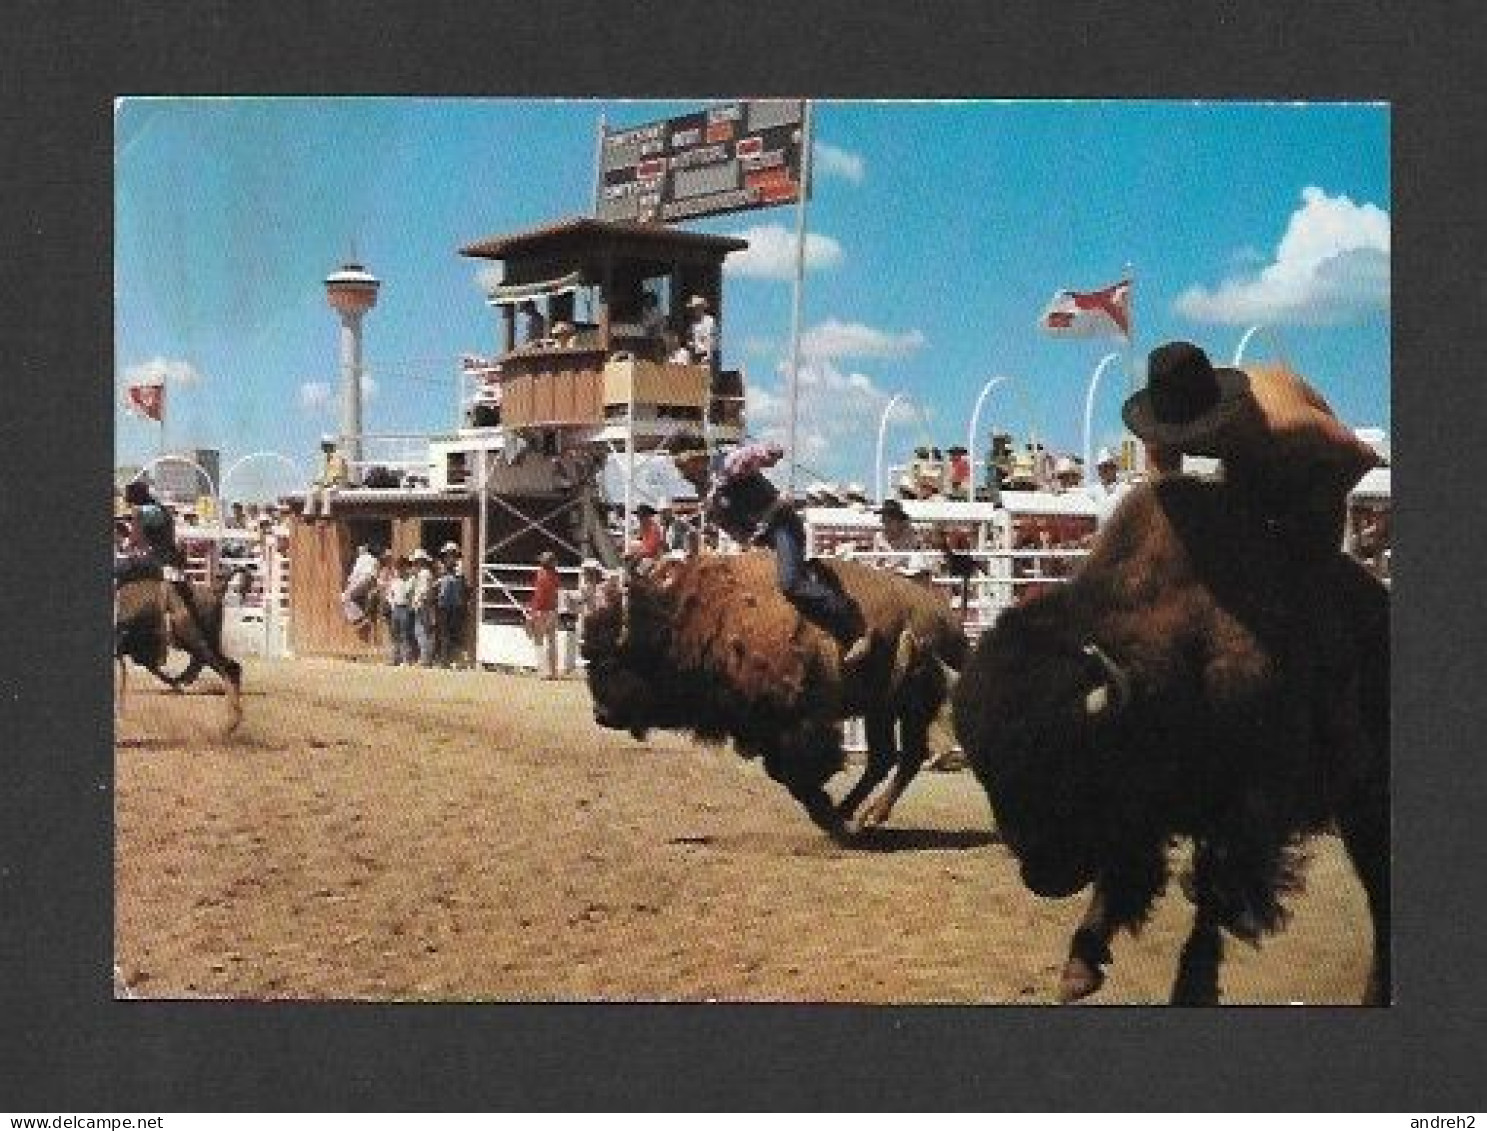 Calgary - Alberta - Calgary Exhibition & Stampede - Indians Riding Wild Buffalo At The Stampede - Photo  Fred Kobsted - Calgary